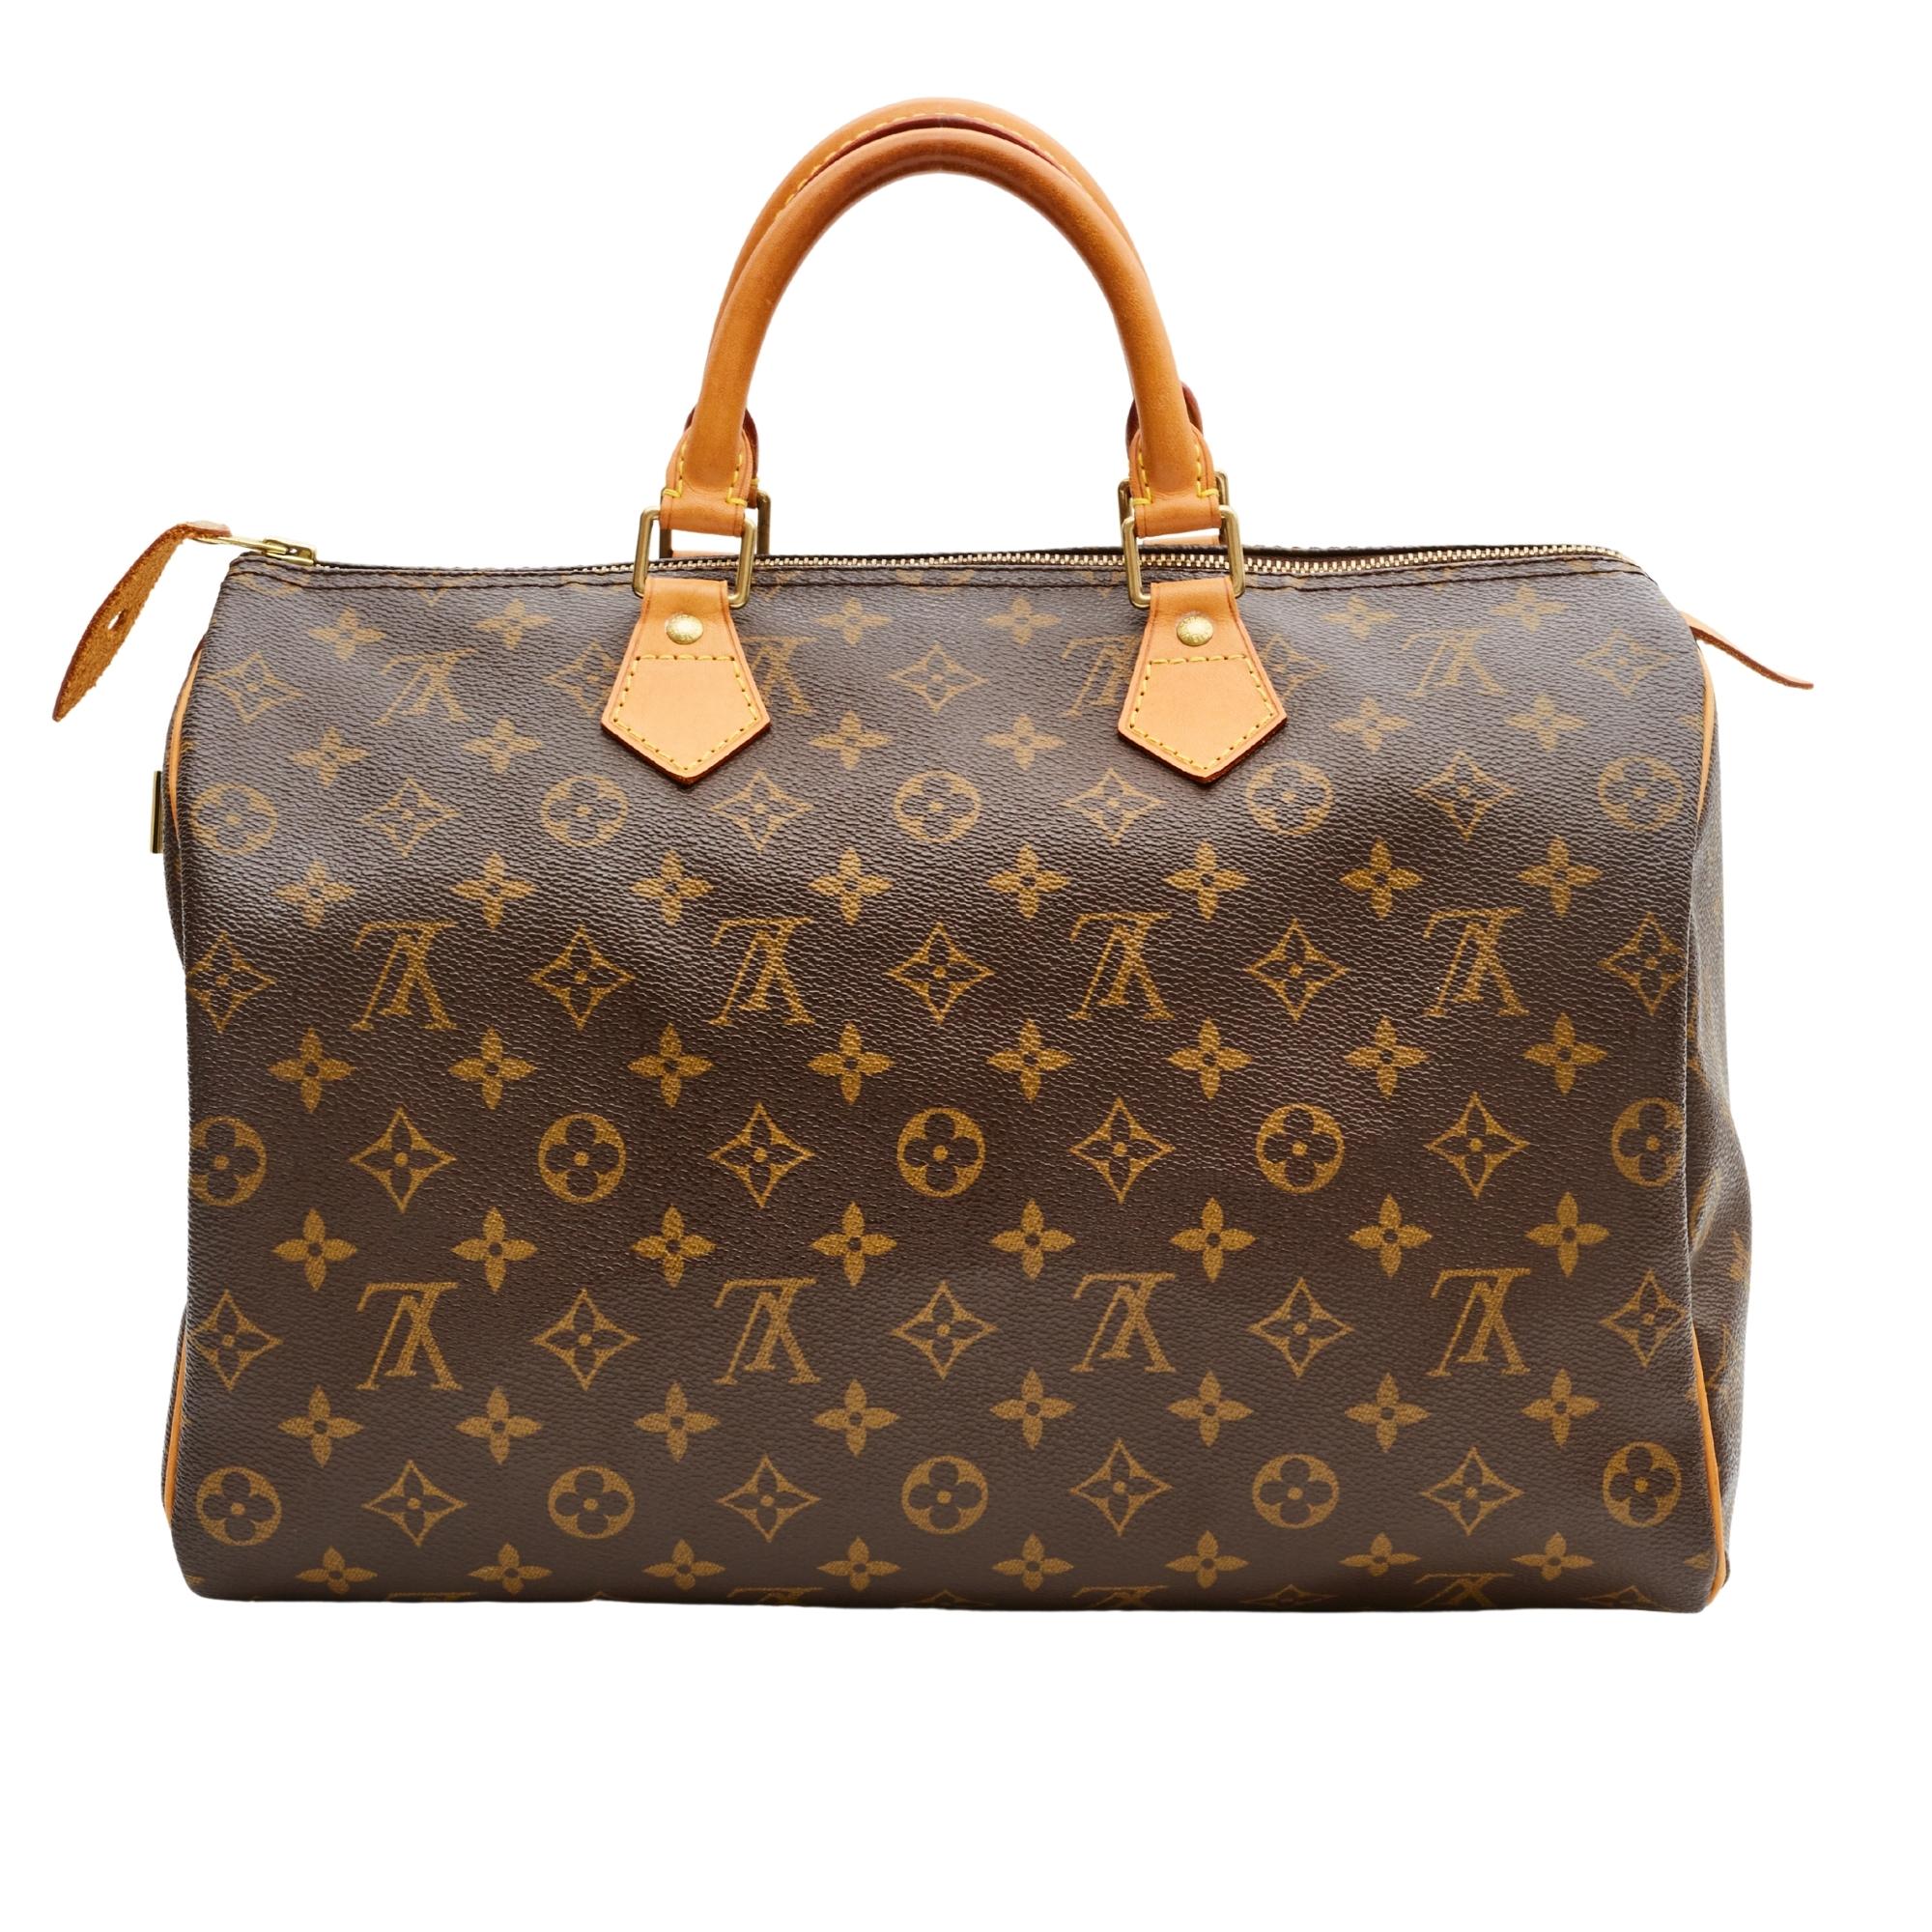 This iconic bag is made from brown monogram coated canvas with vachetta leather finishes. The Speedy 35 is a stylish handbag for both travel and daily use. Launched in 1930 as the 